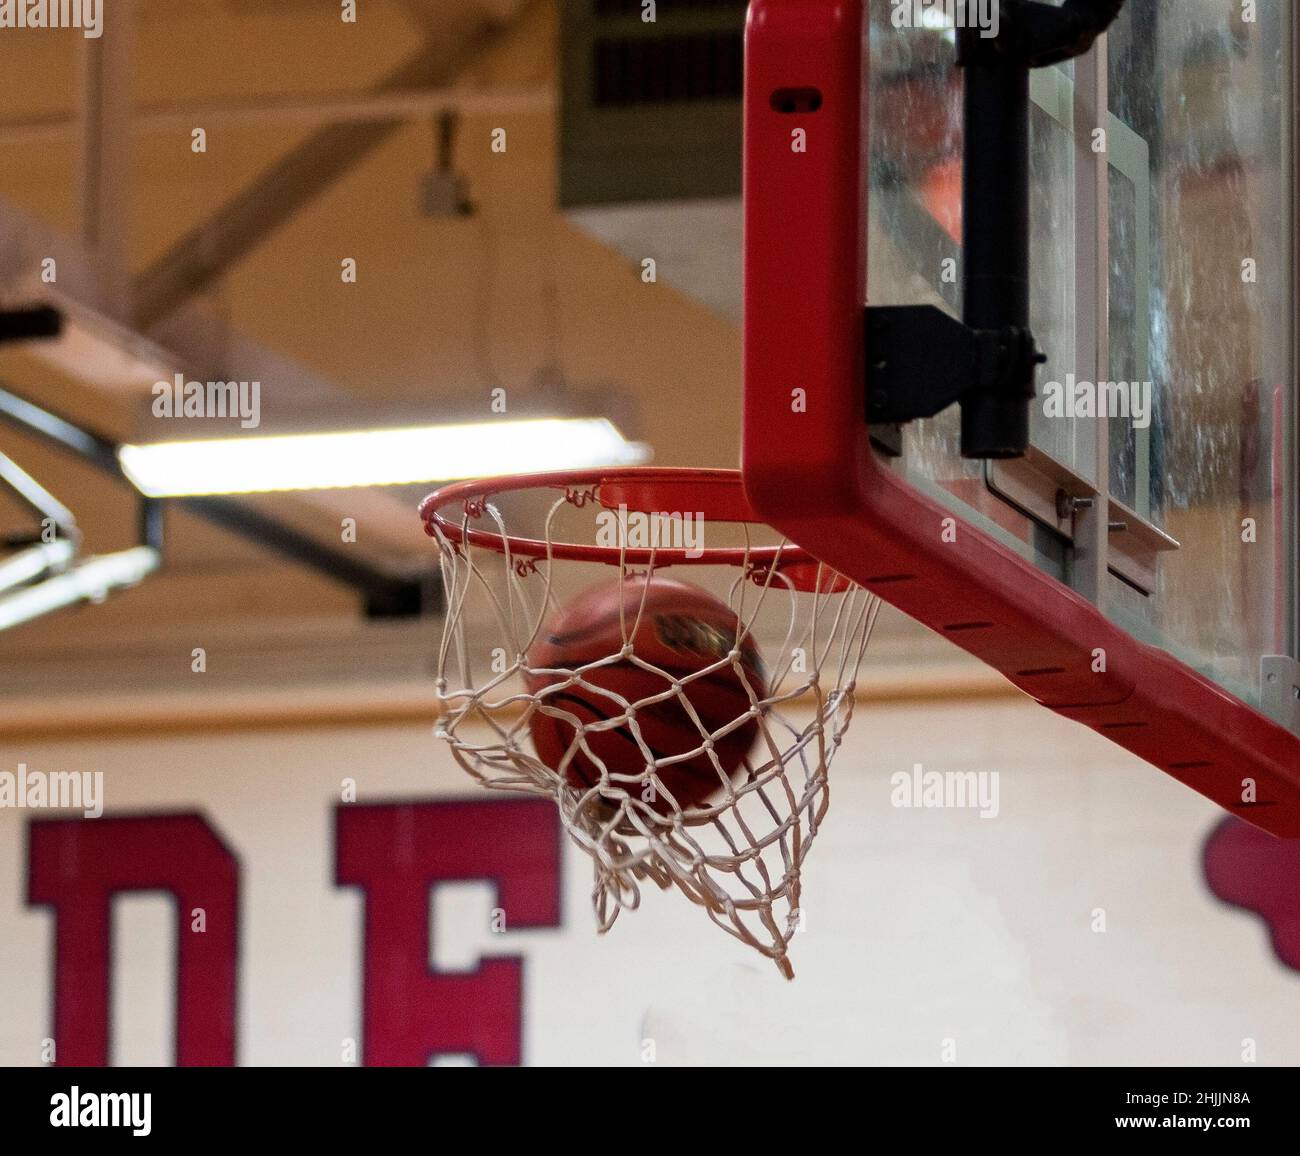 A basketball shot is made with the ball going though the net during a indoor game. Stock Photo